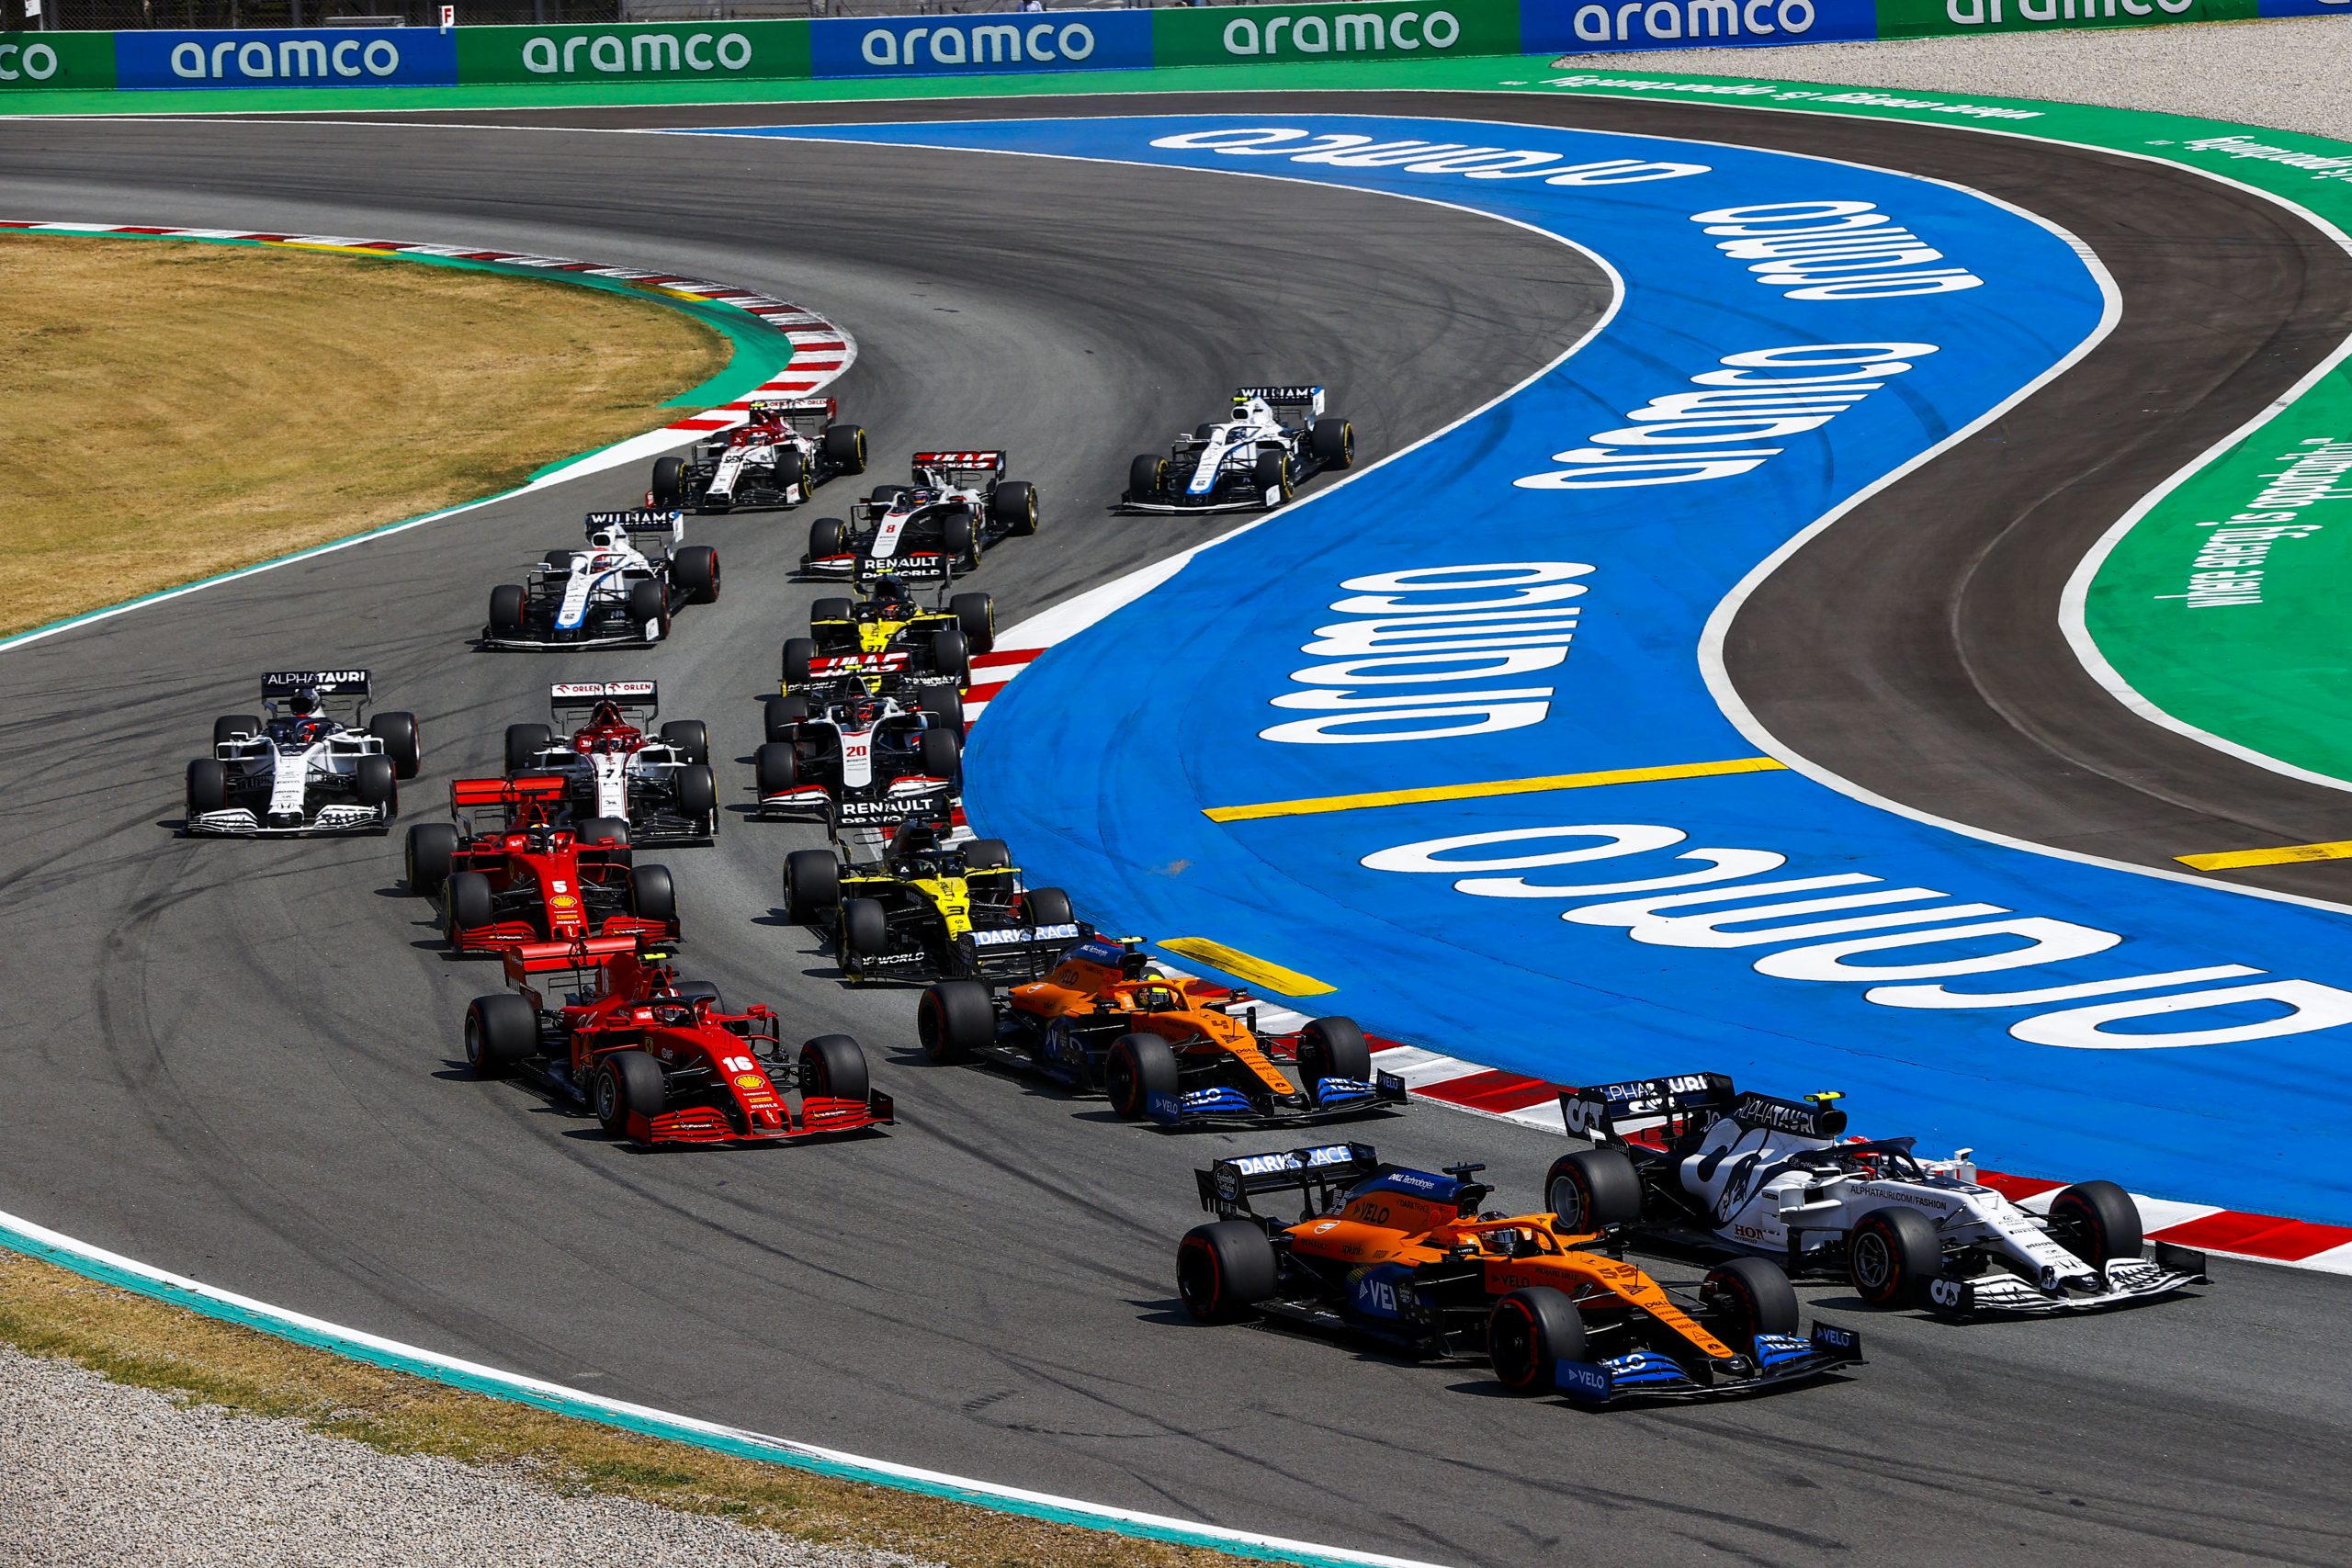 2020 Formula 1 Standings after the 2020 Spanish Grand Prix